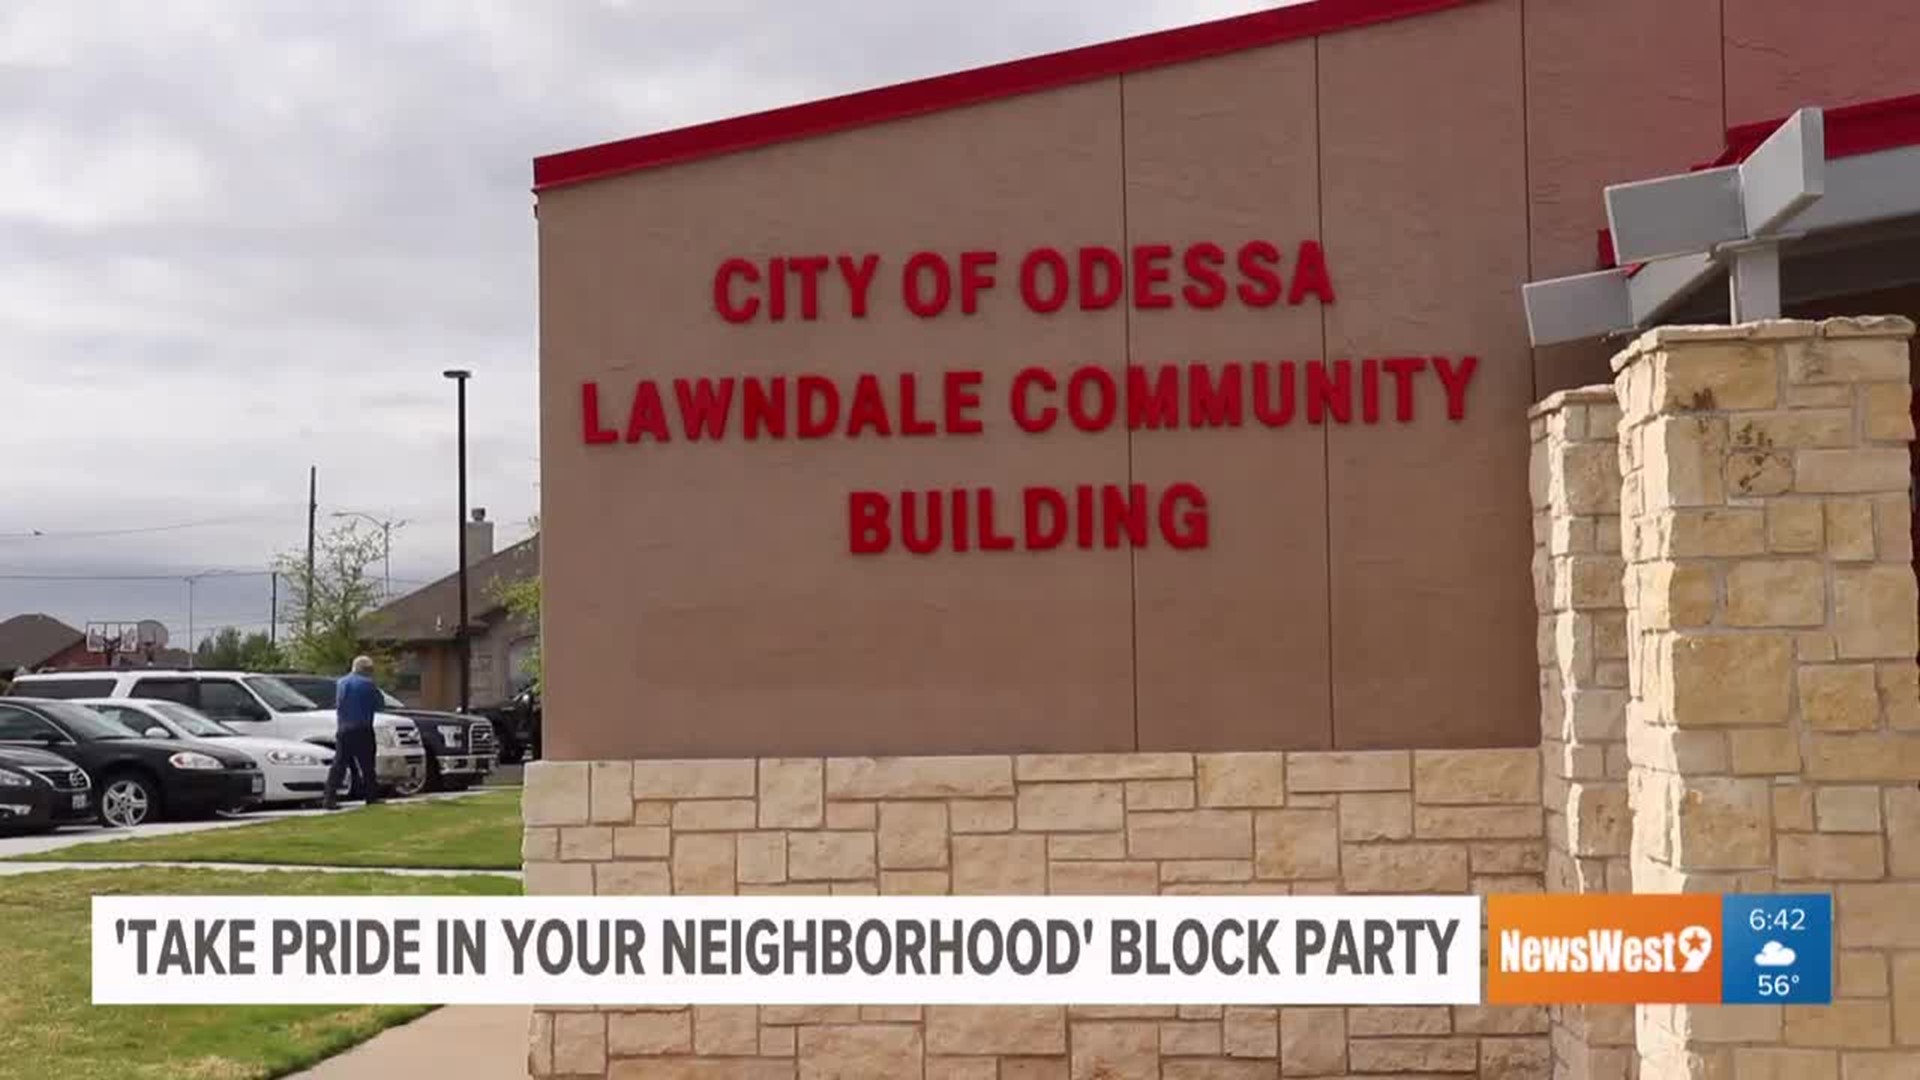 City of Odessa ready to celebrate cleanliness with a block party